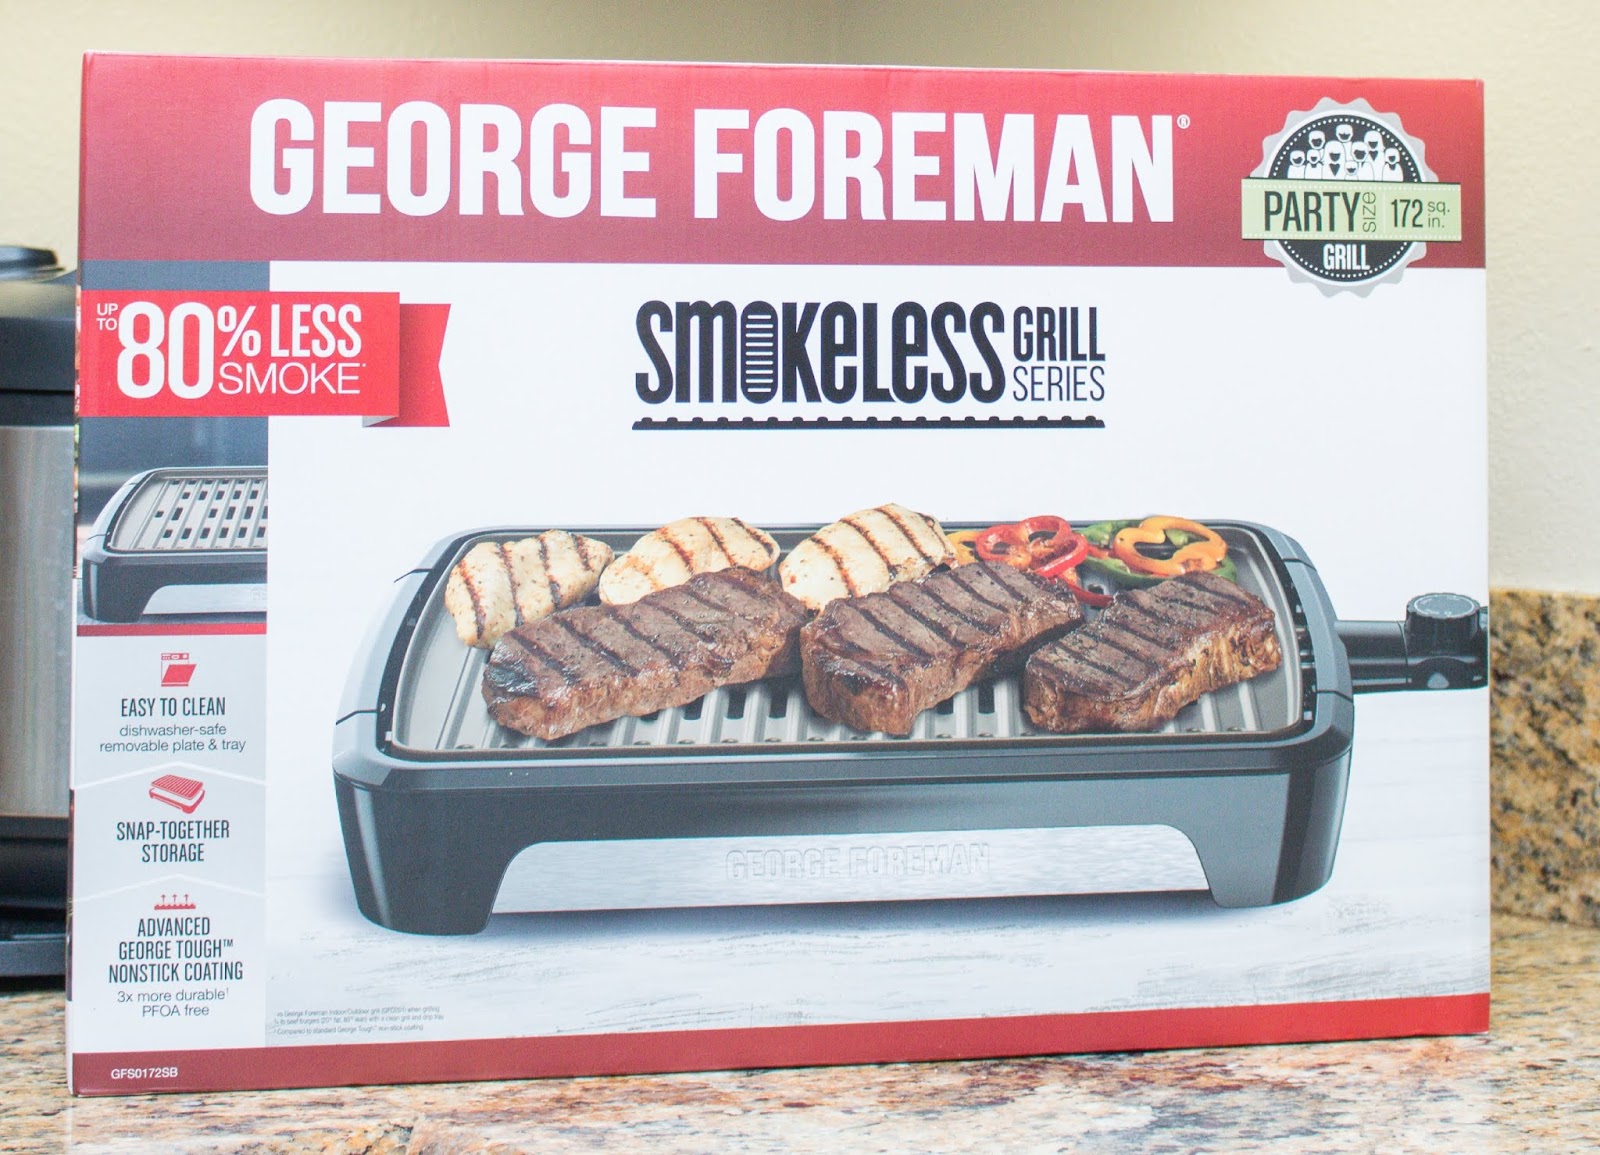 Indoor Grilling Made Easy: George Foreman Open Grate Smokeless